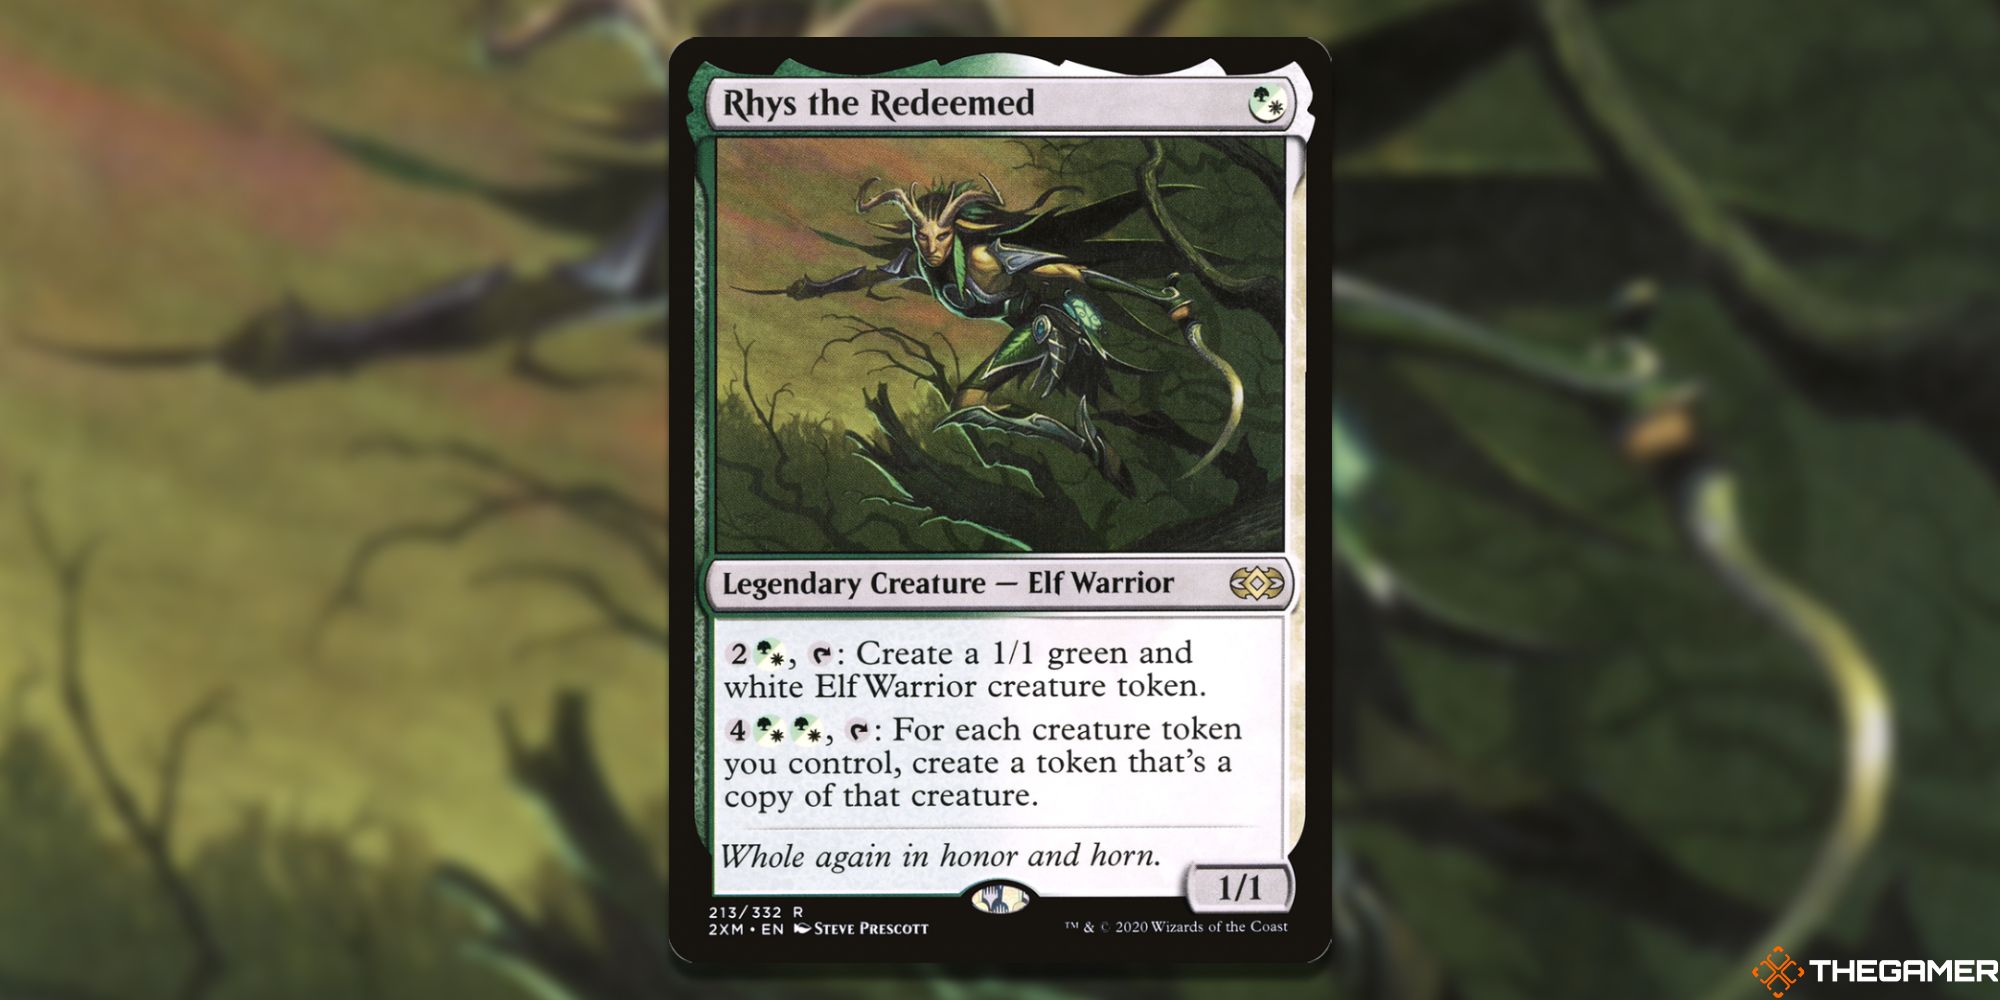 Image of the Rhys the Redeemed card in Magic: The Gathering, with art by Steve Prescott